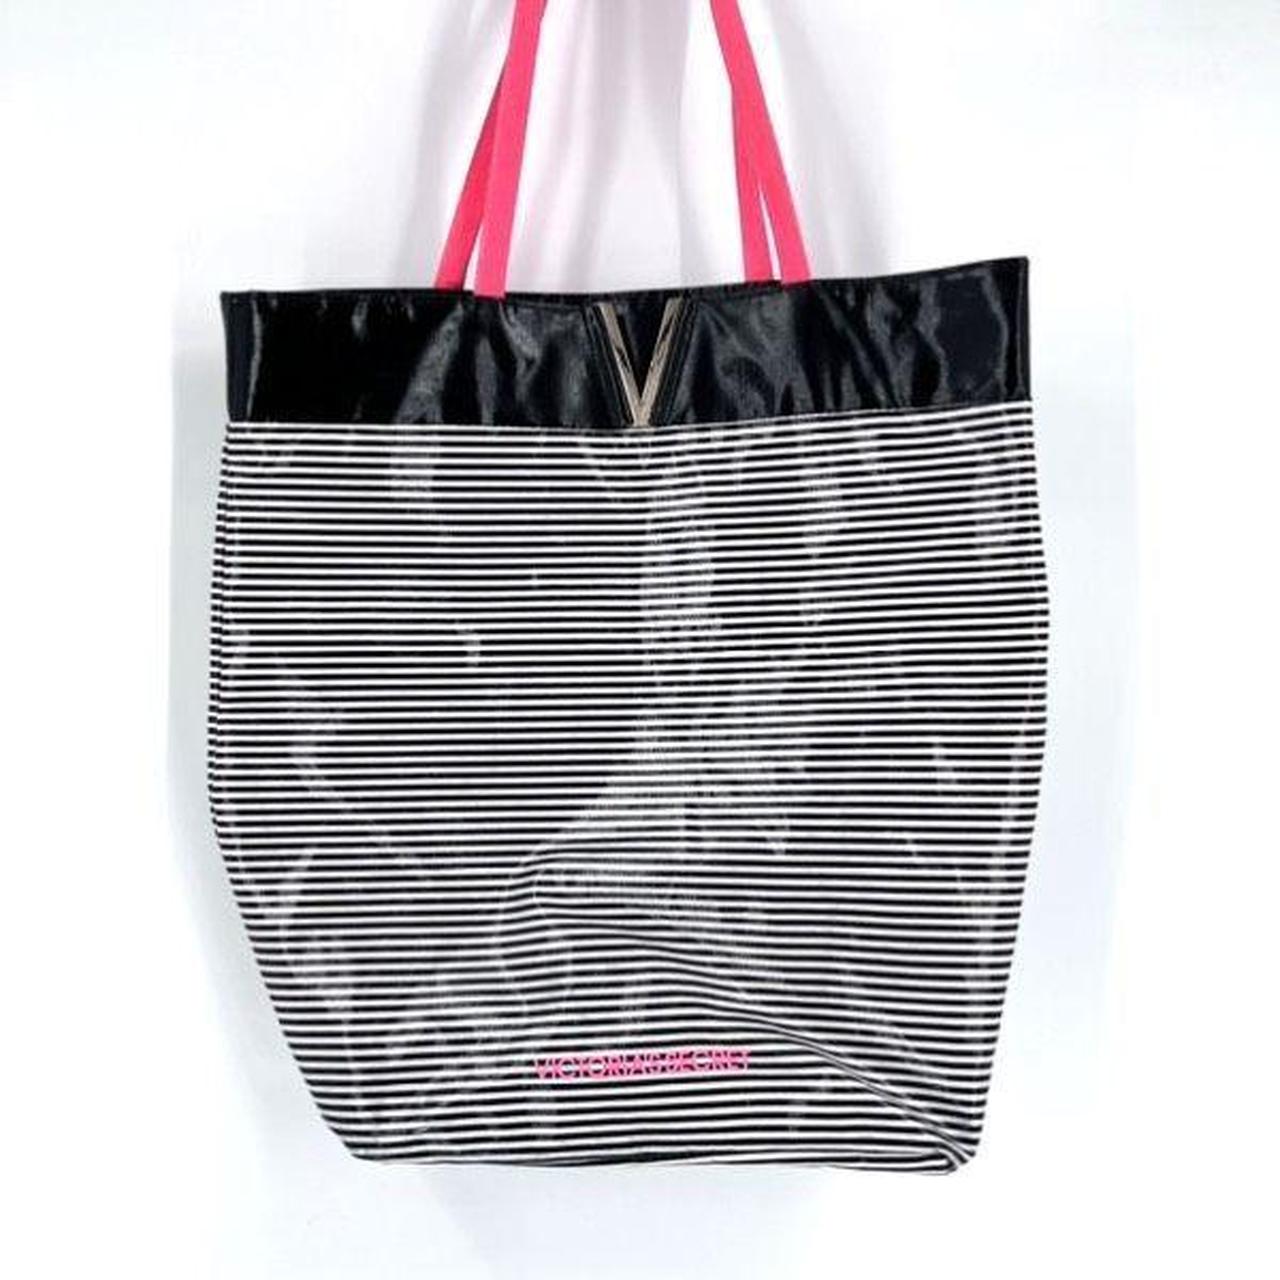 Love Pink tote bag. This bag is a medium/large sized